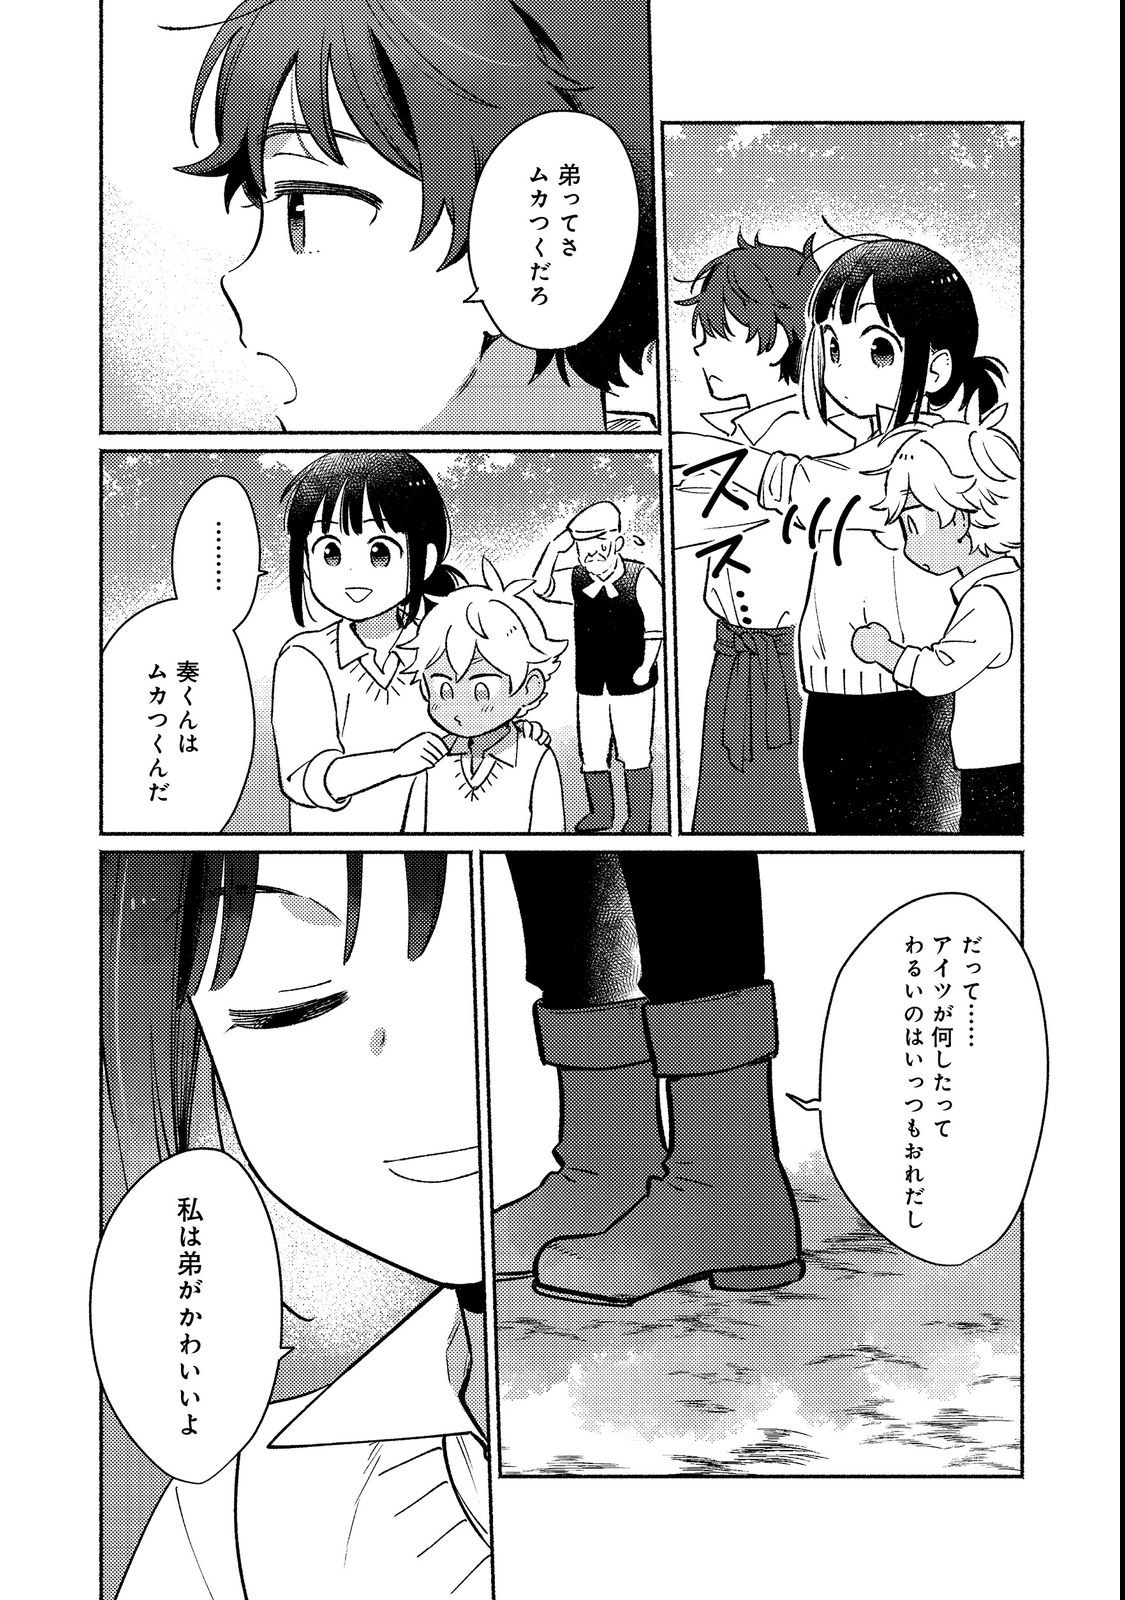 I’m the White Pig Nobleman 第18.1話 - Page 8